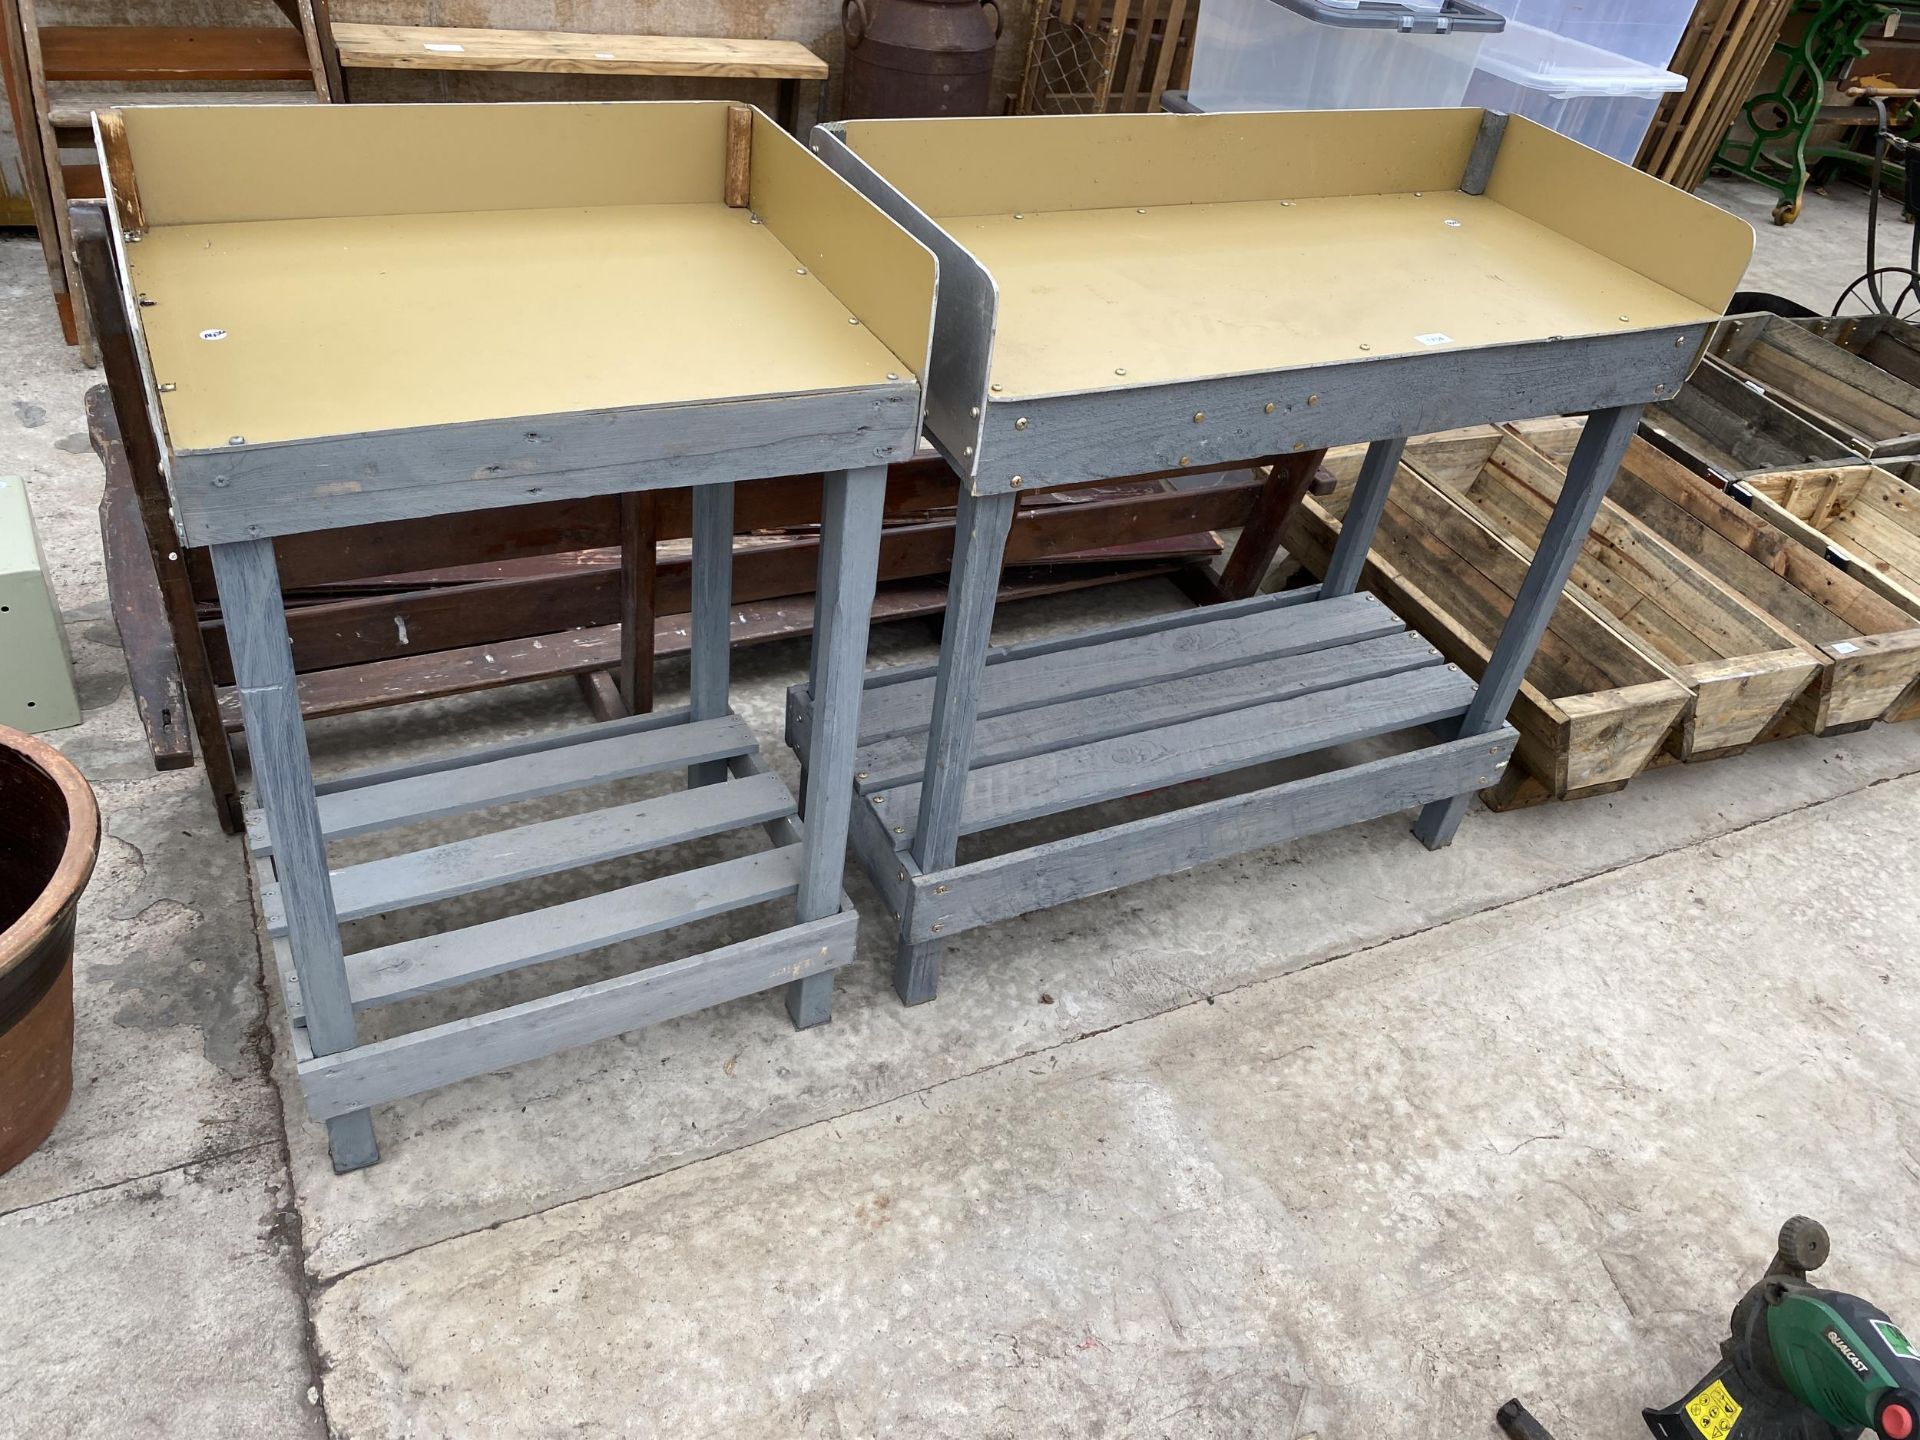 TWO WOODEN POTTING BENCHES